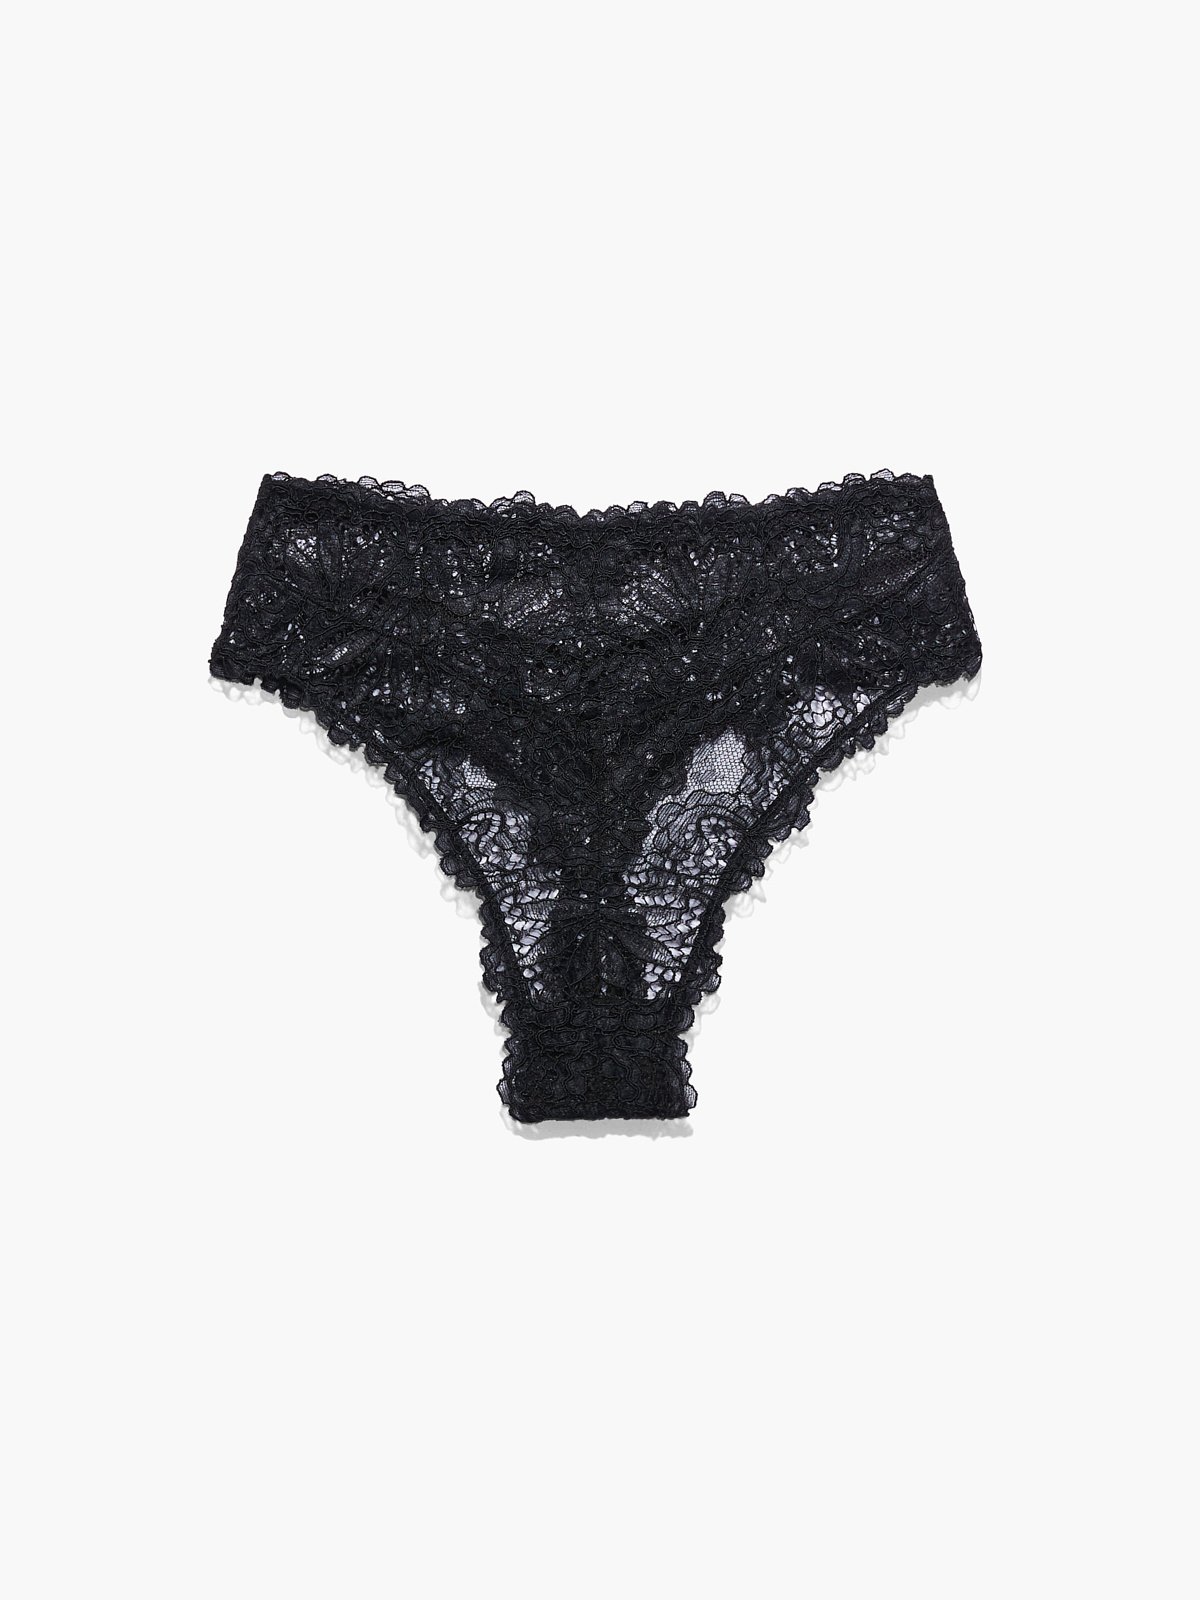 High-Waisted Underwear Lace Thong Panties